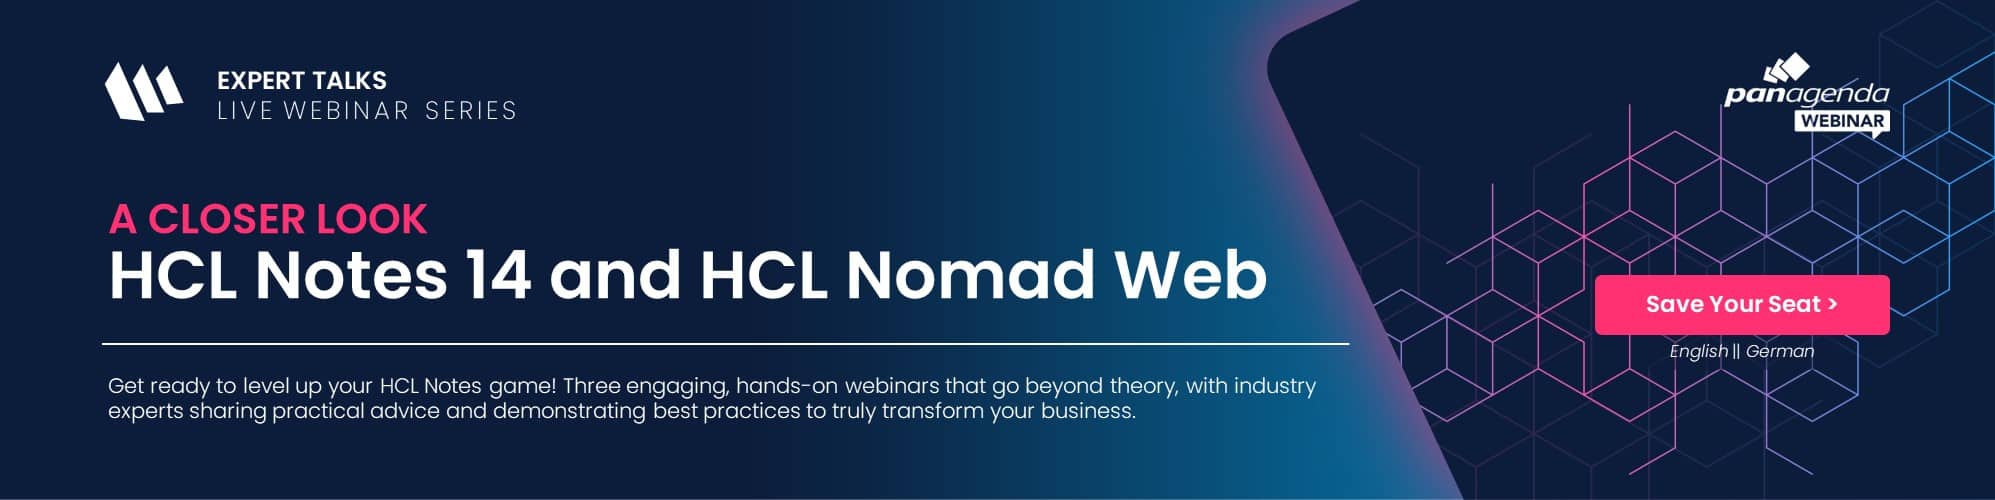 webinar-series-banner-web-A-Closer-Look: HCL-Notes-14-and HCL-Nomad-Web